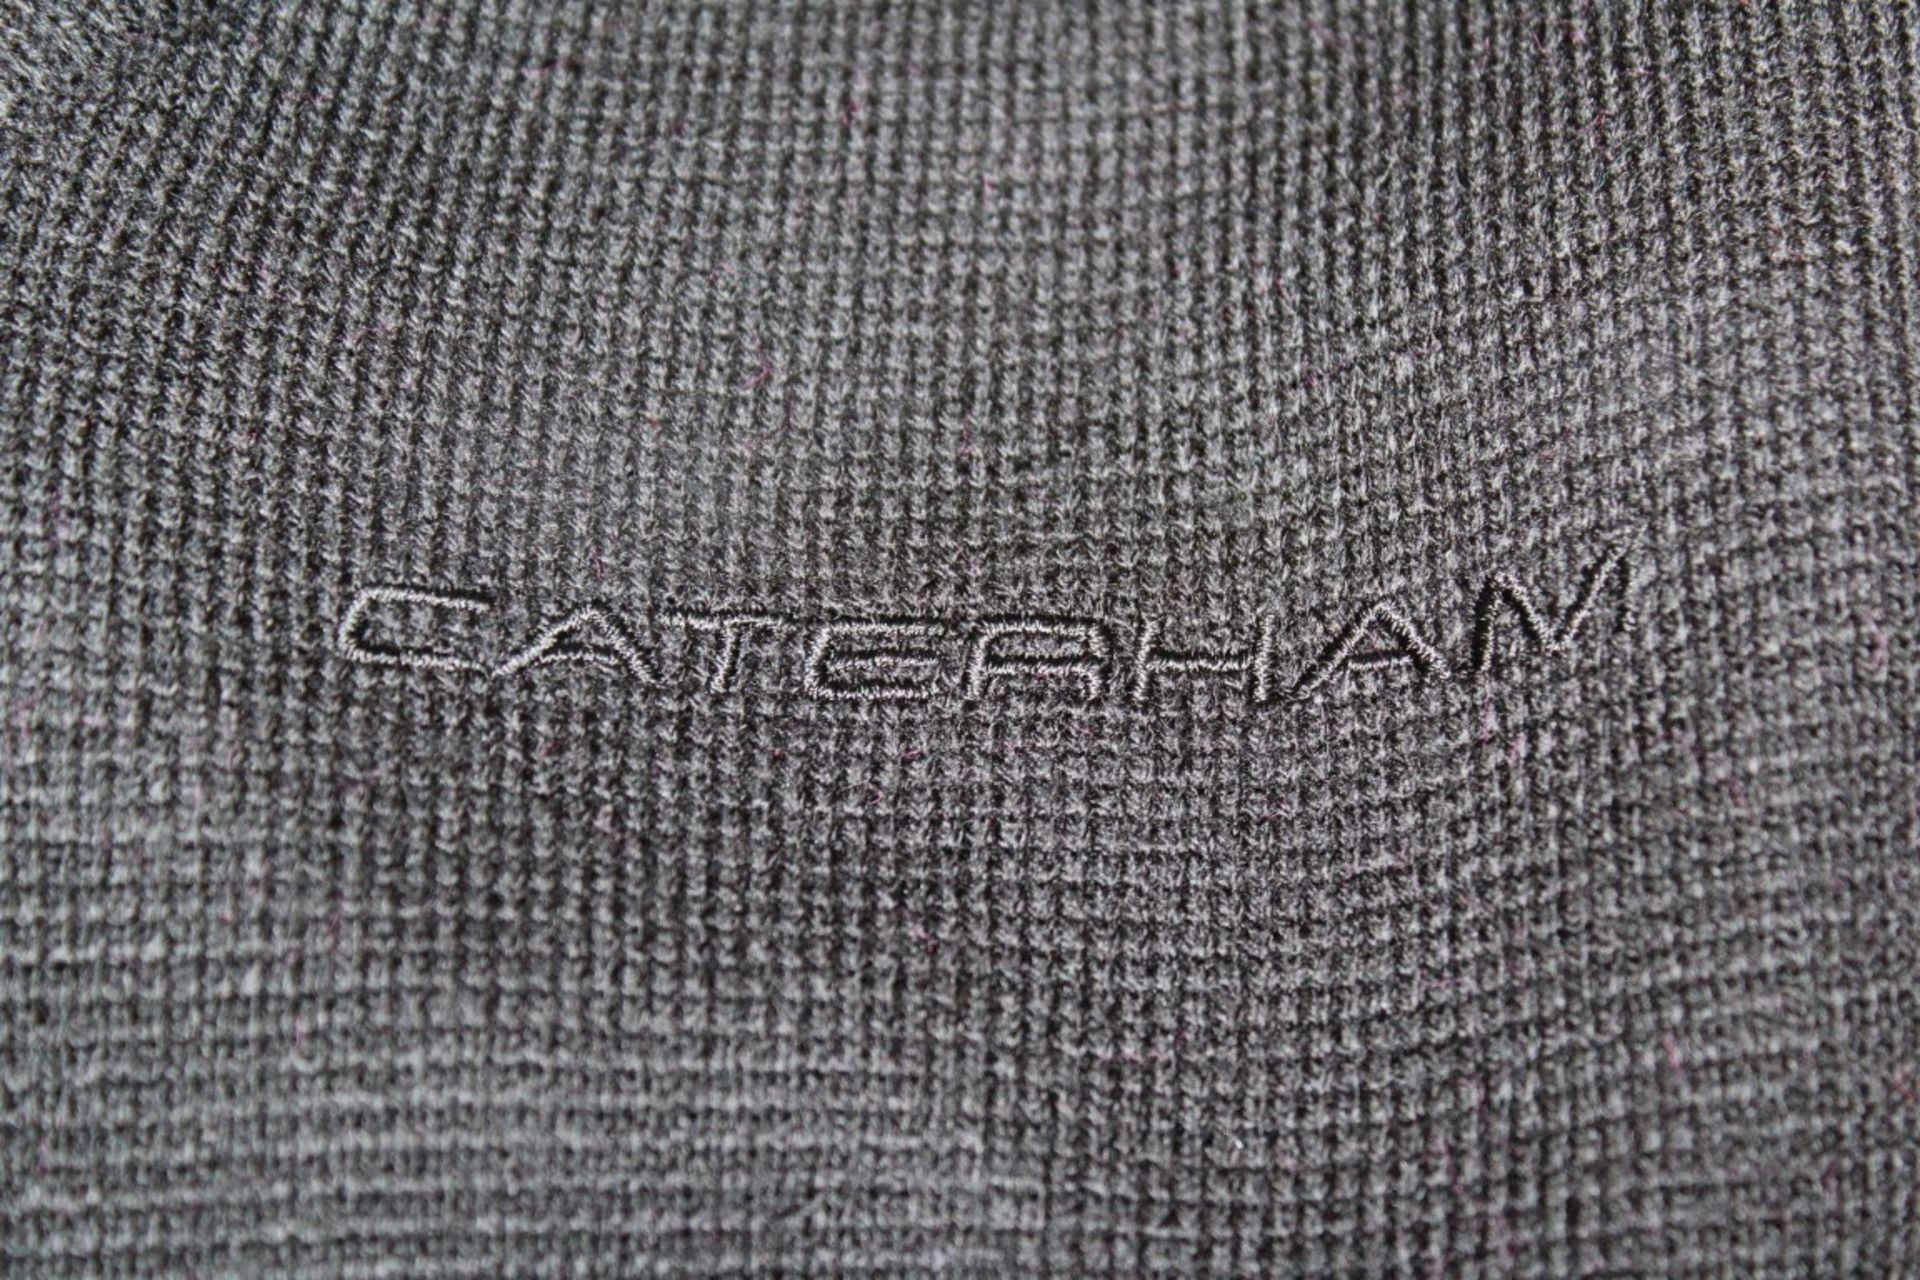 12 x CATERHAM Branded V-Neck Sweaters / Jumpers - Sizes Range From XS To XL (See Full Description) - - Image 4 of 5